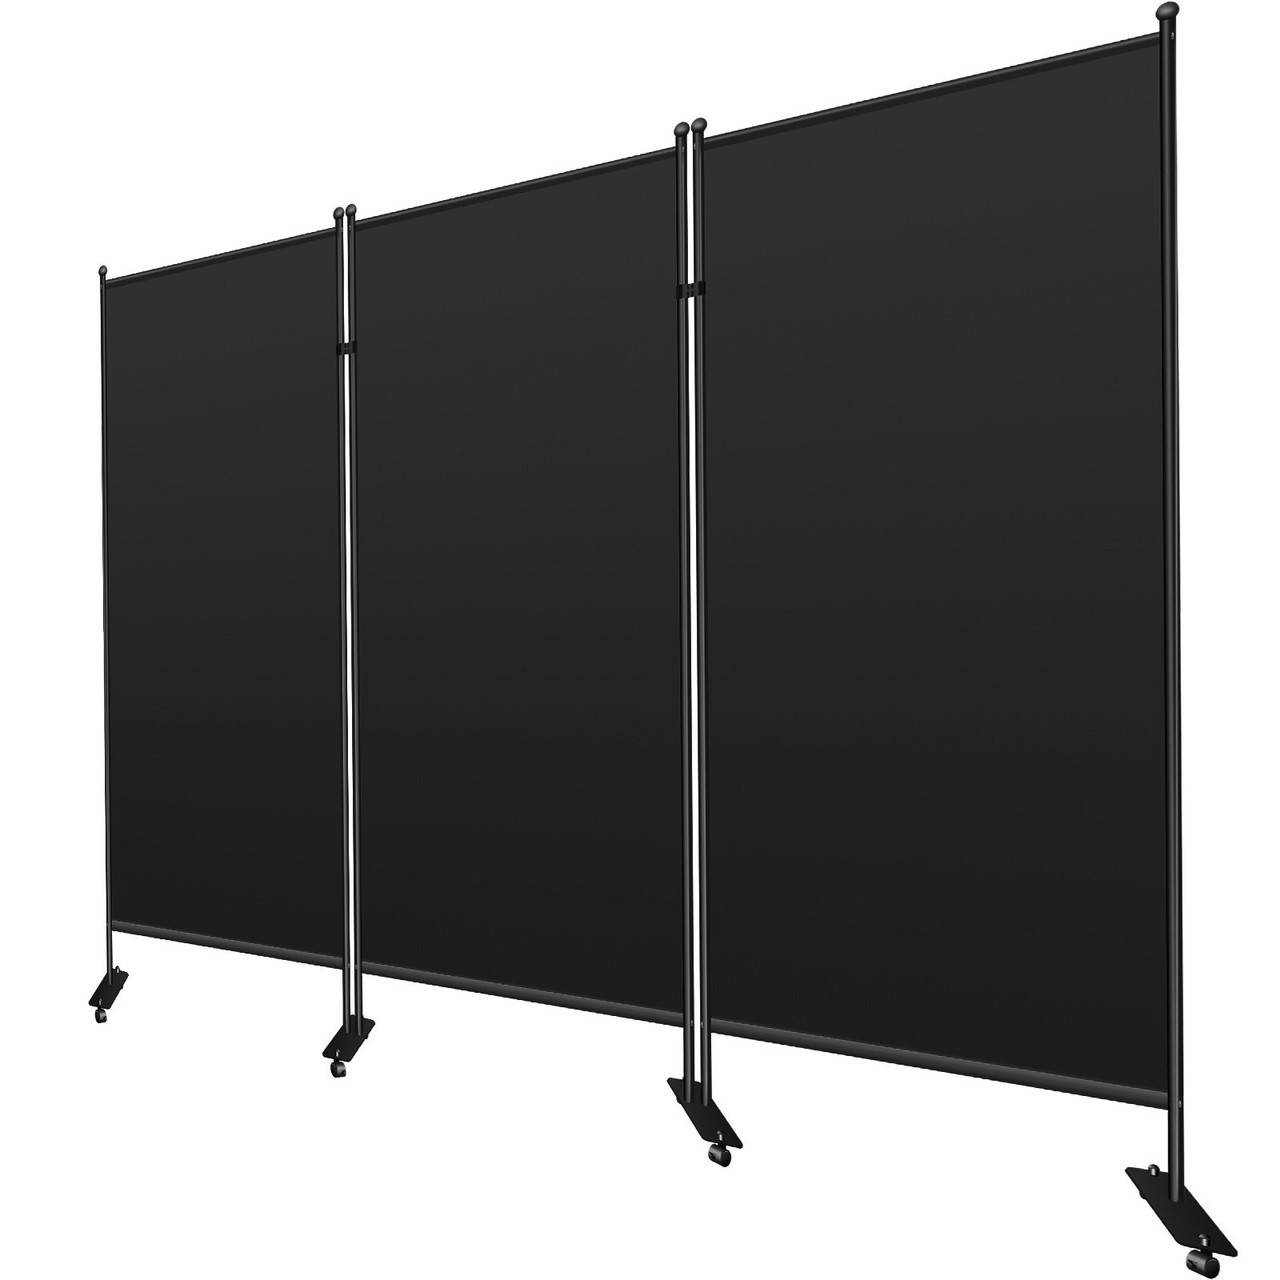 Office Partition 89" W x 14" D x 73" H Room Divider Wall 3-Panel Office Divider Folding Portable Office Walls Divider with Non-See-Through Fabric